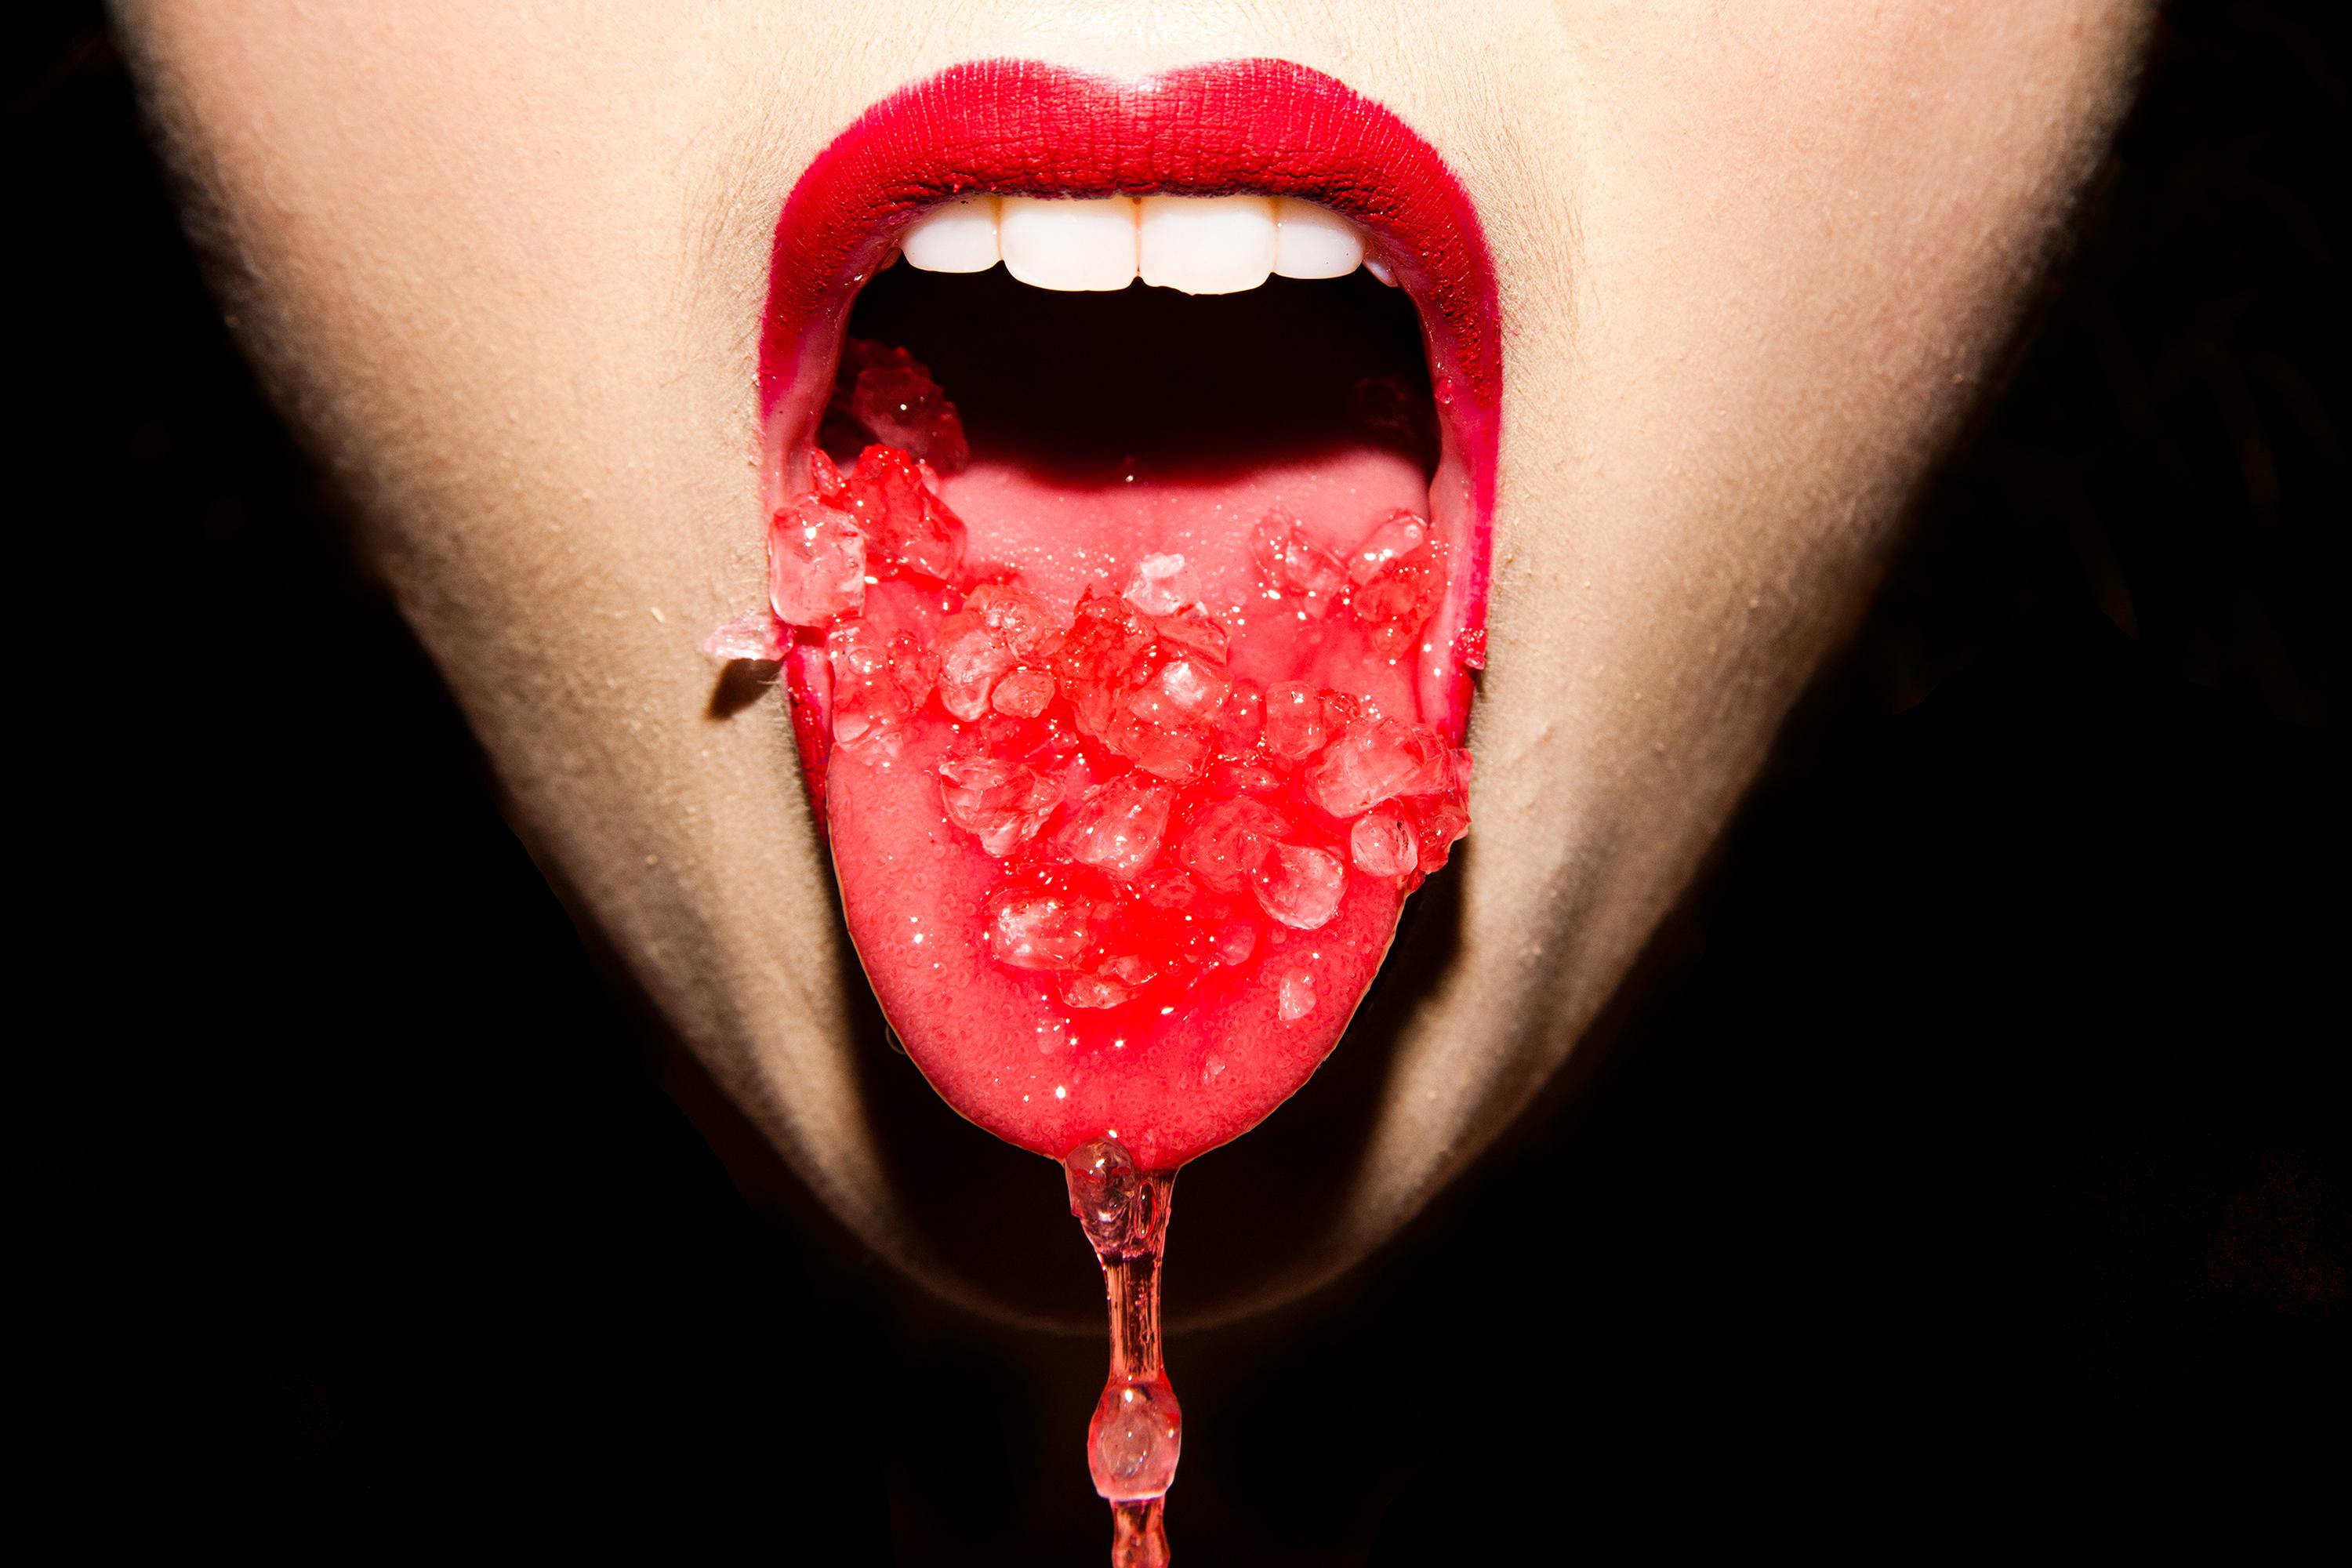 Tyler Shields Color Photograph - Mouth Drip (30" x 40")